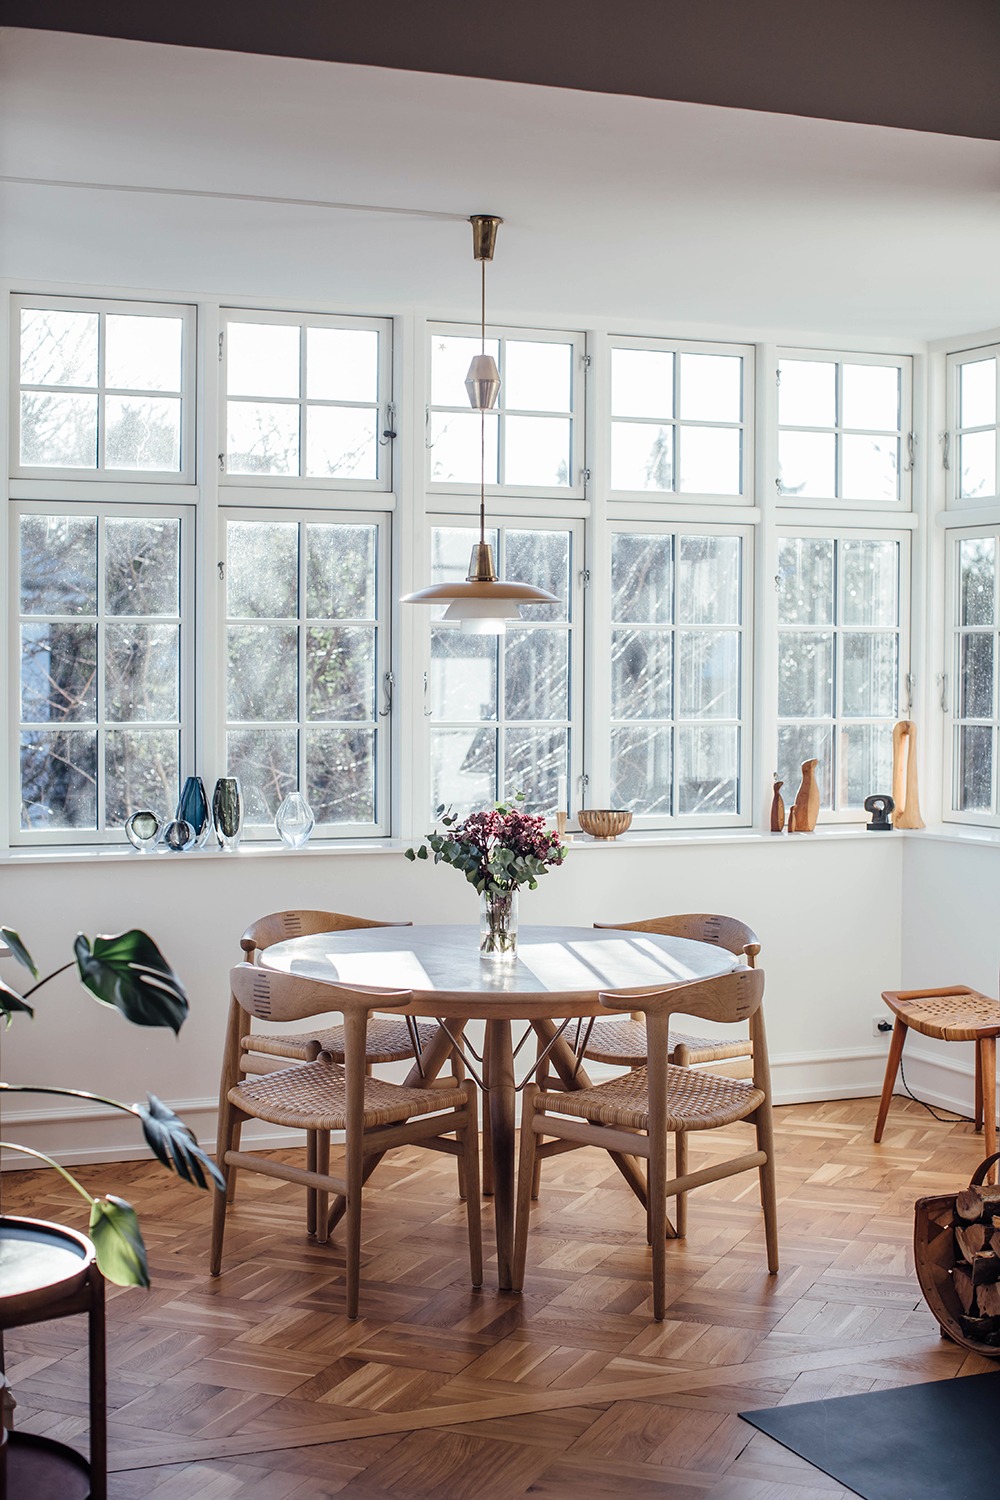 Home Tour with Anders Forup in Copenhagen